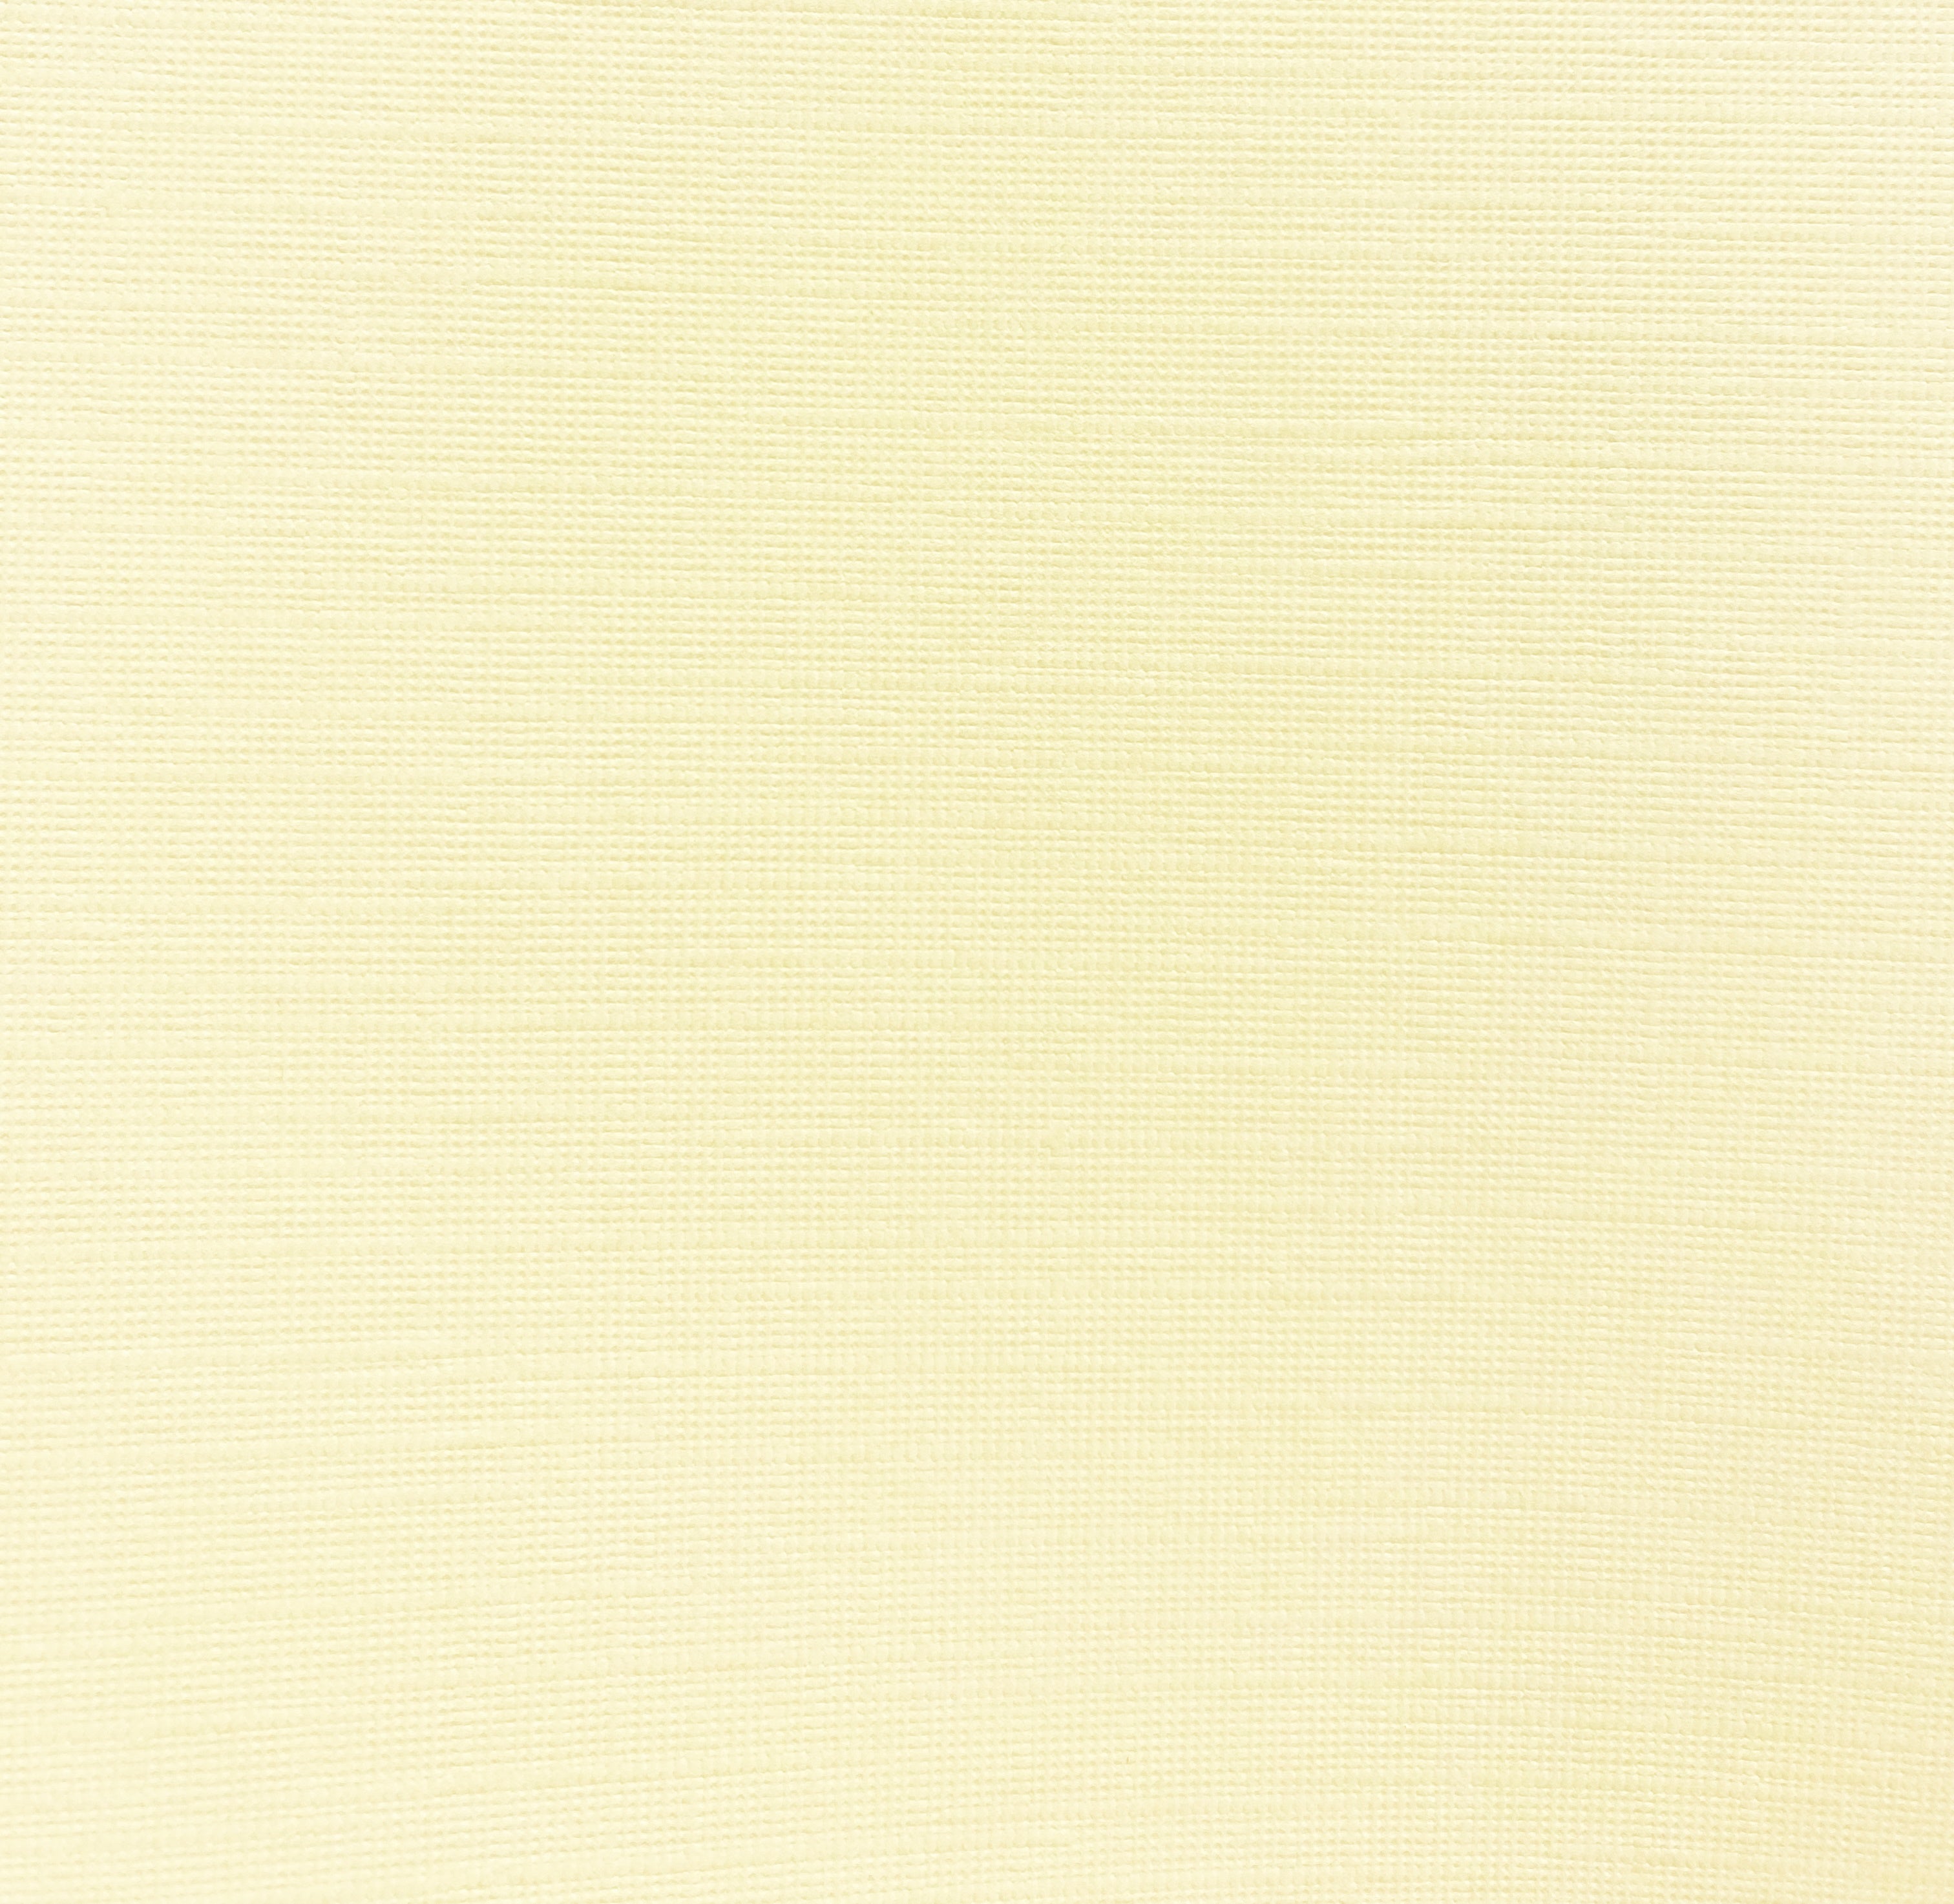 The Paper Company - Cardstock - Ivory -   12 x 12"